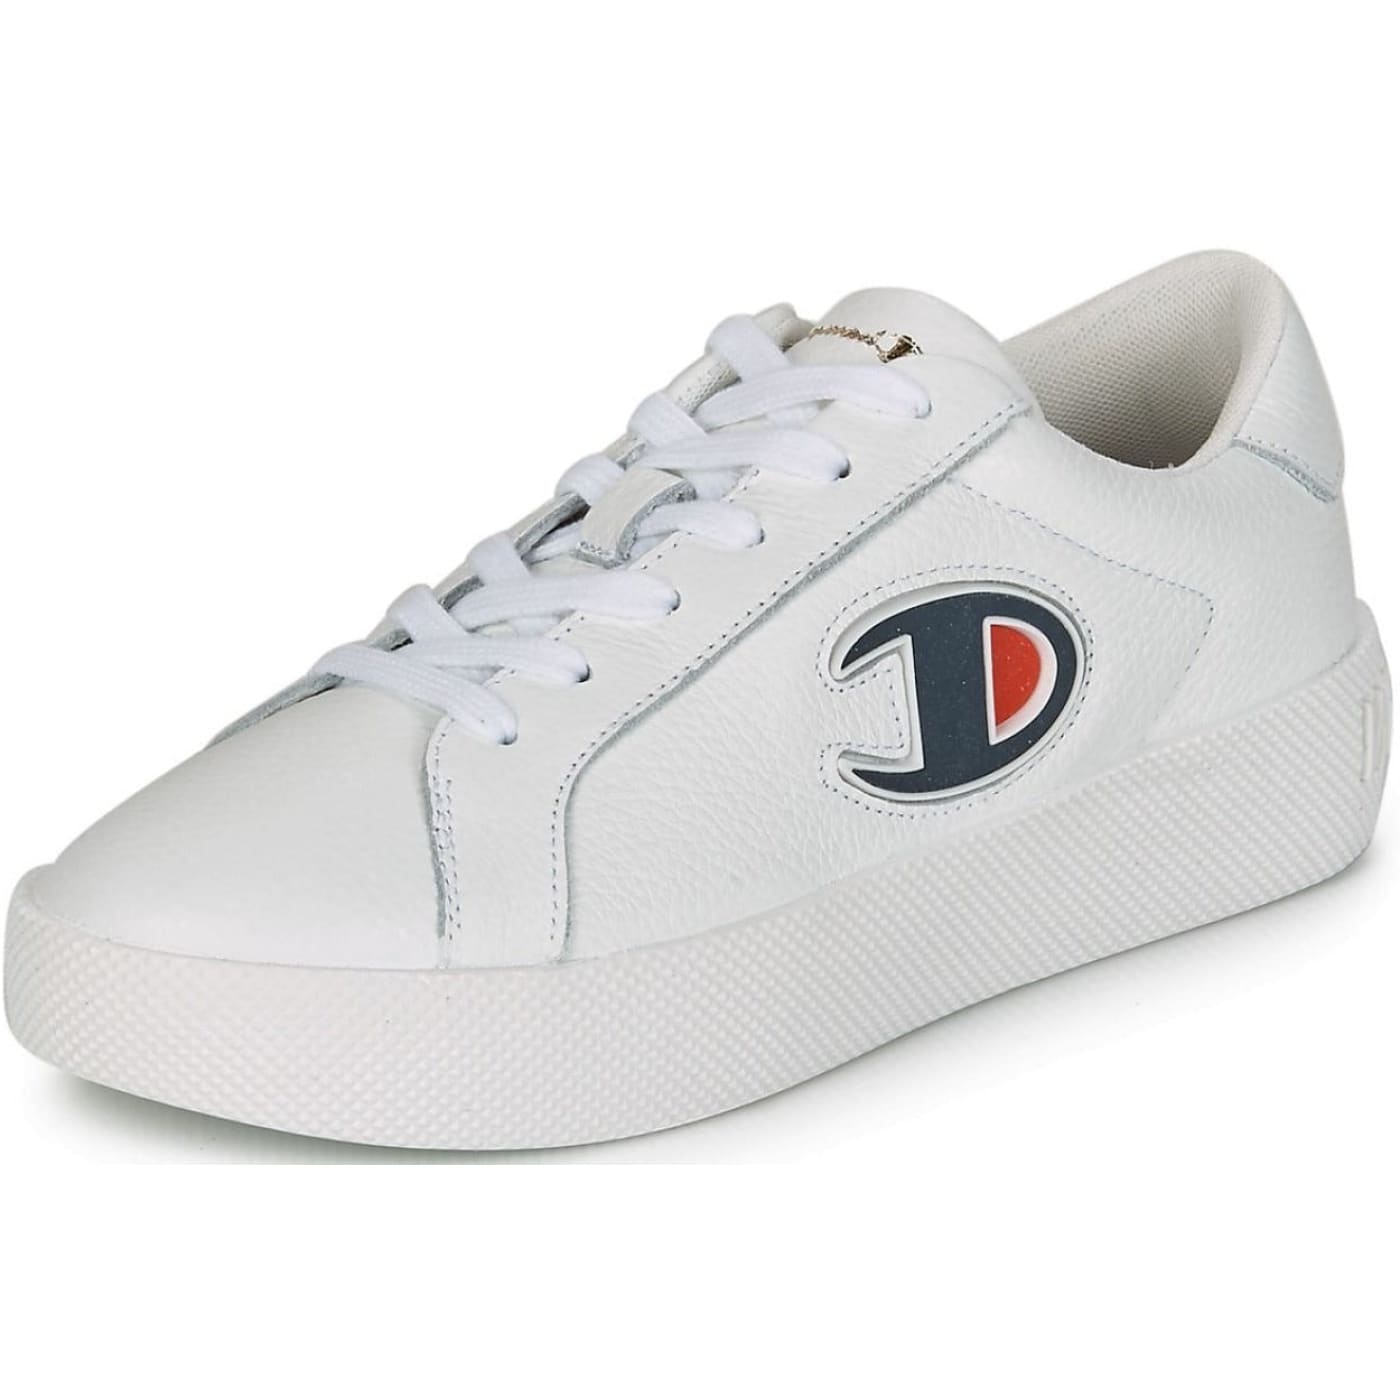 Memo Tanke controller Champion Era White Leather Womens Trainers Shoes – Top Brand Shoes